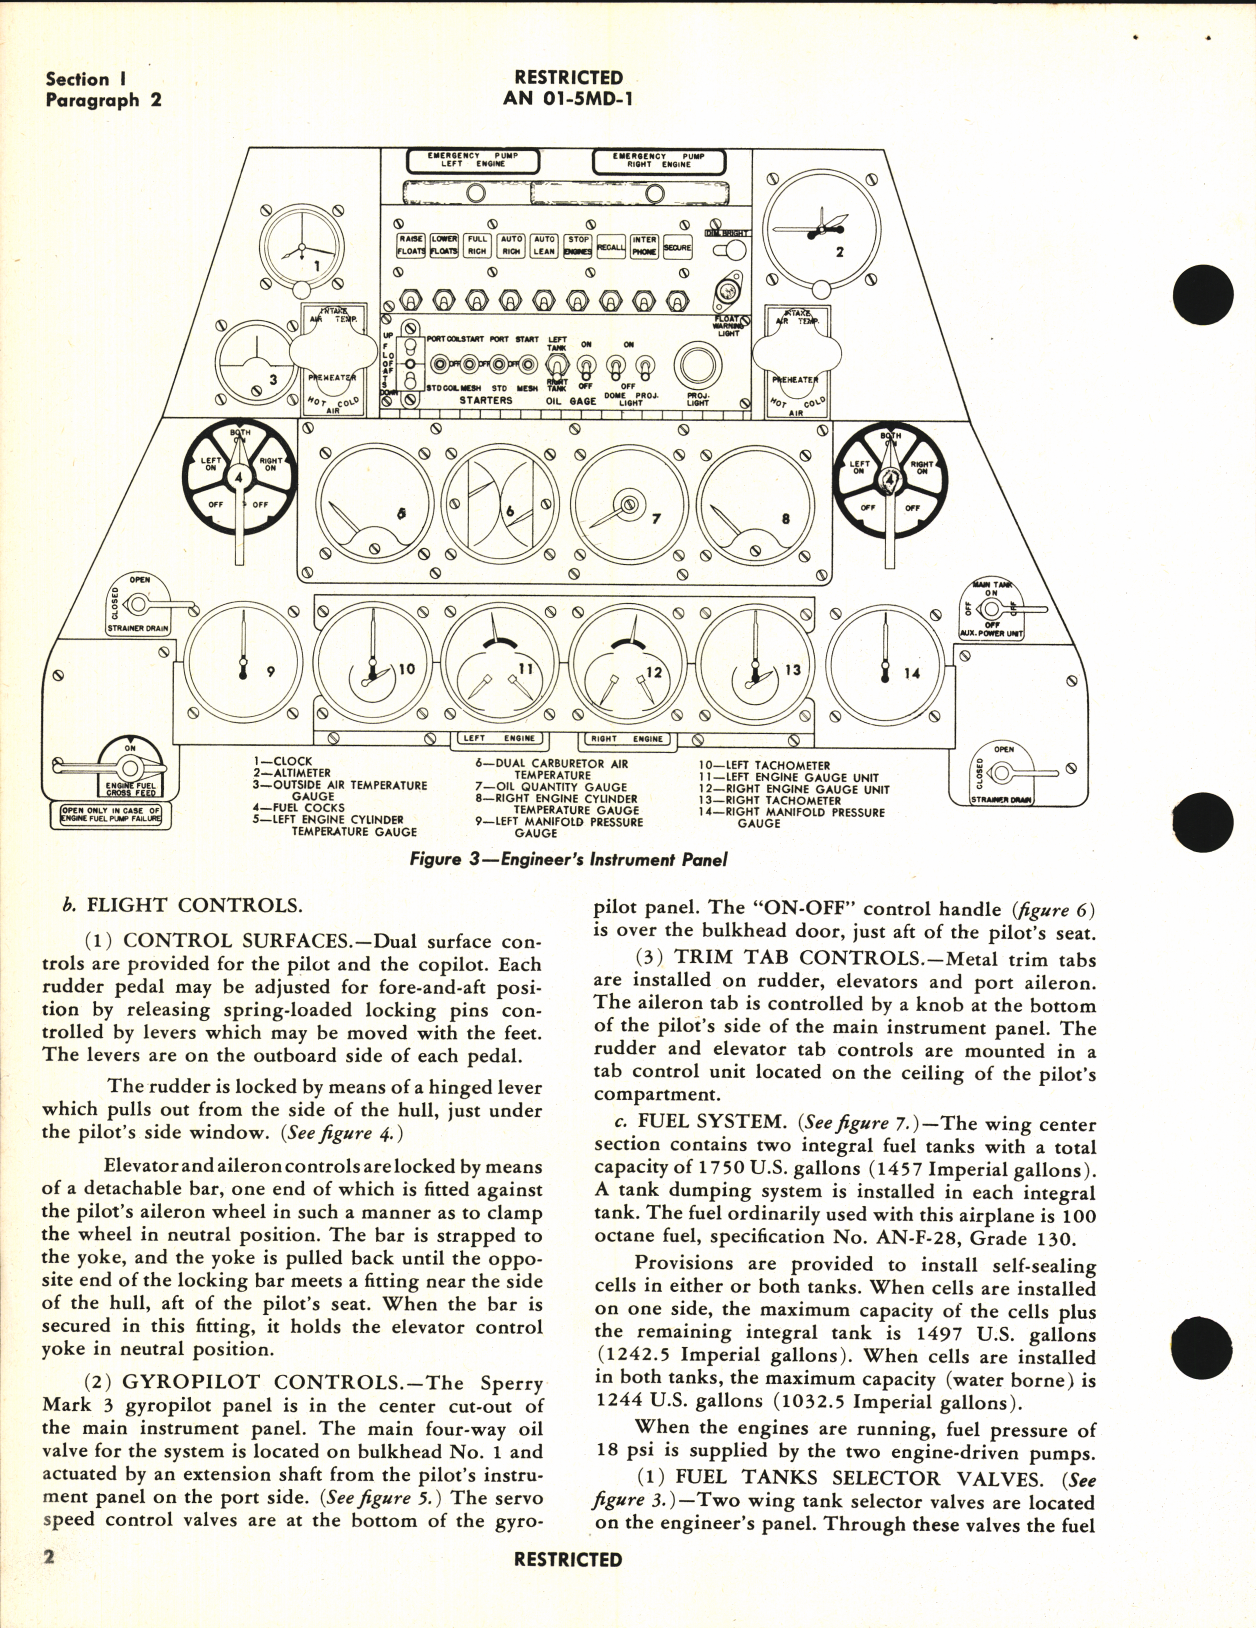 Sample page 6 from AirCorps Library document: Pilot's Handbook for Army Model OA-10A Airplane